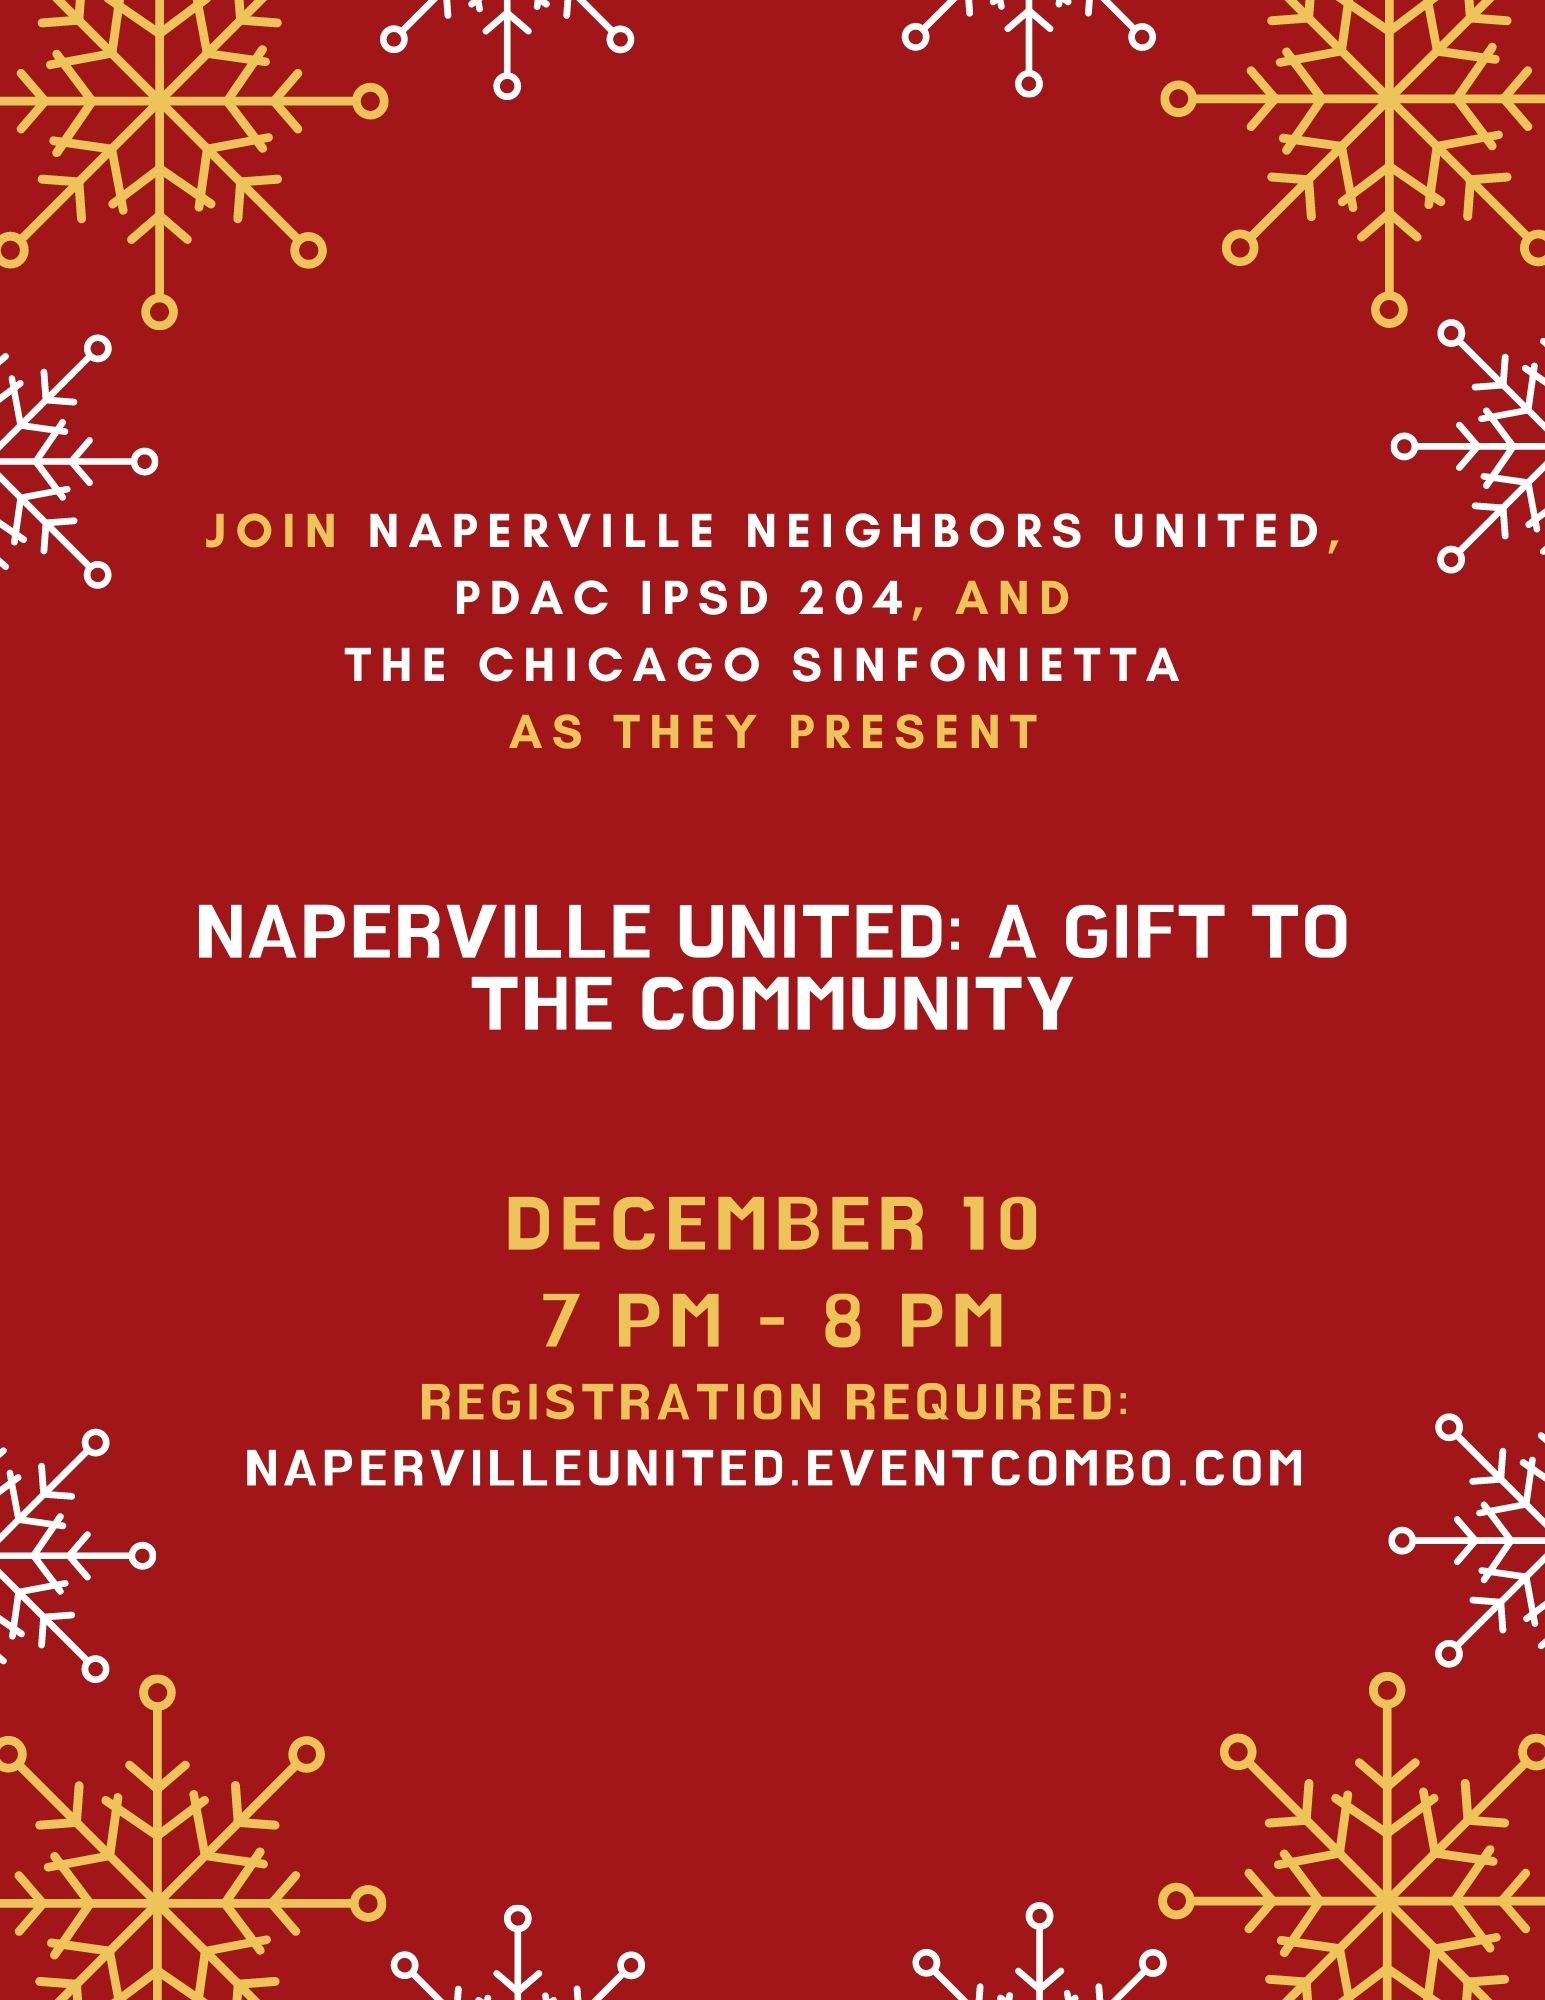 Naperville United: A Gift to the Community